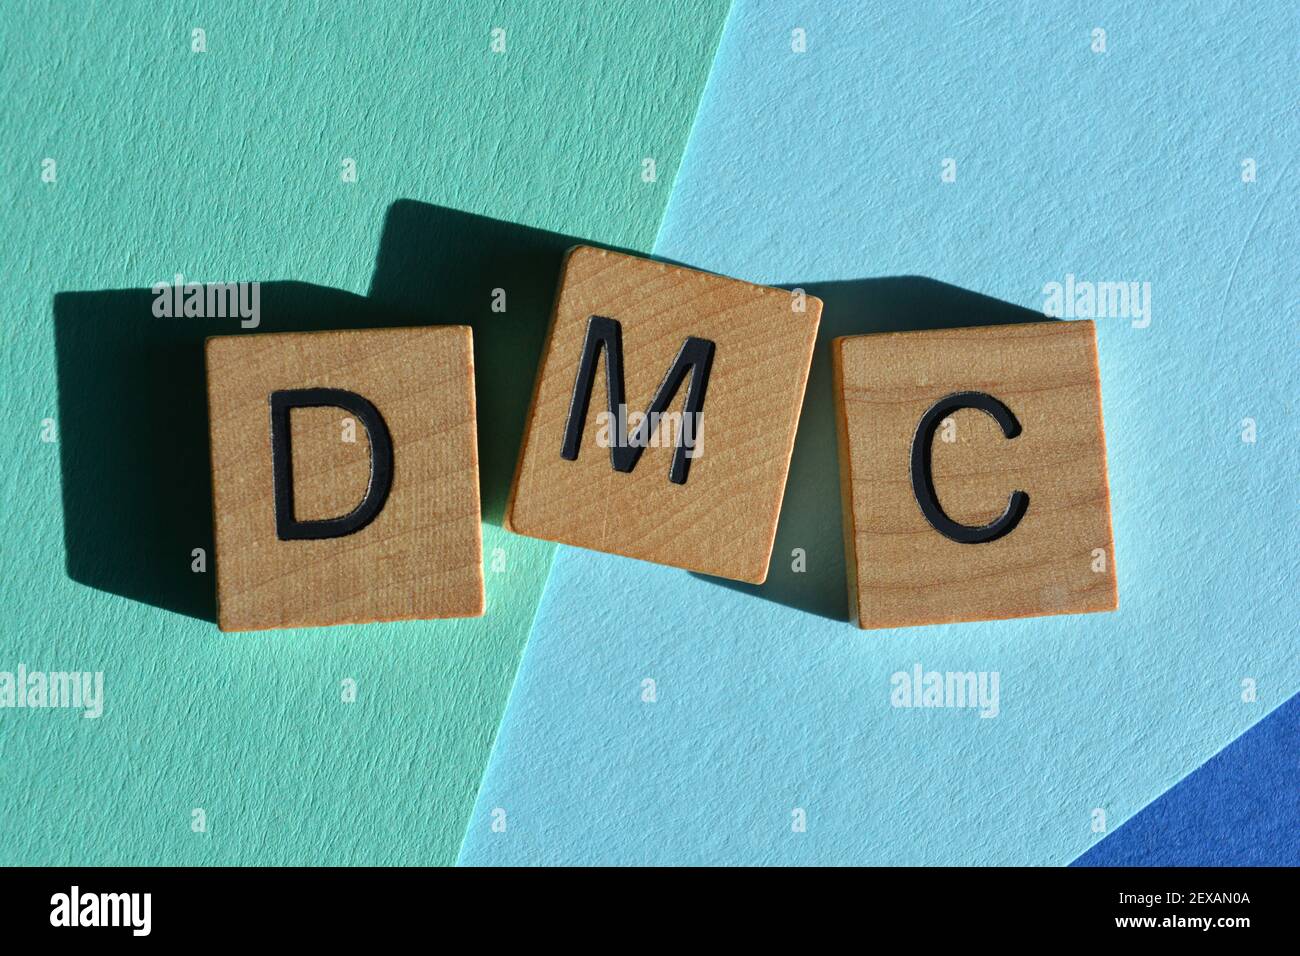 DMC, acronym for Deep and Meaningful Conversation. Internet slang or text speak Stock Photo